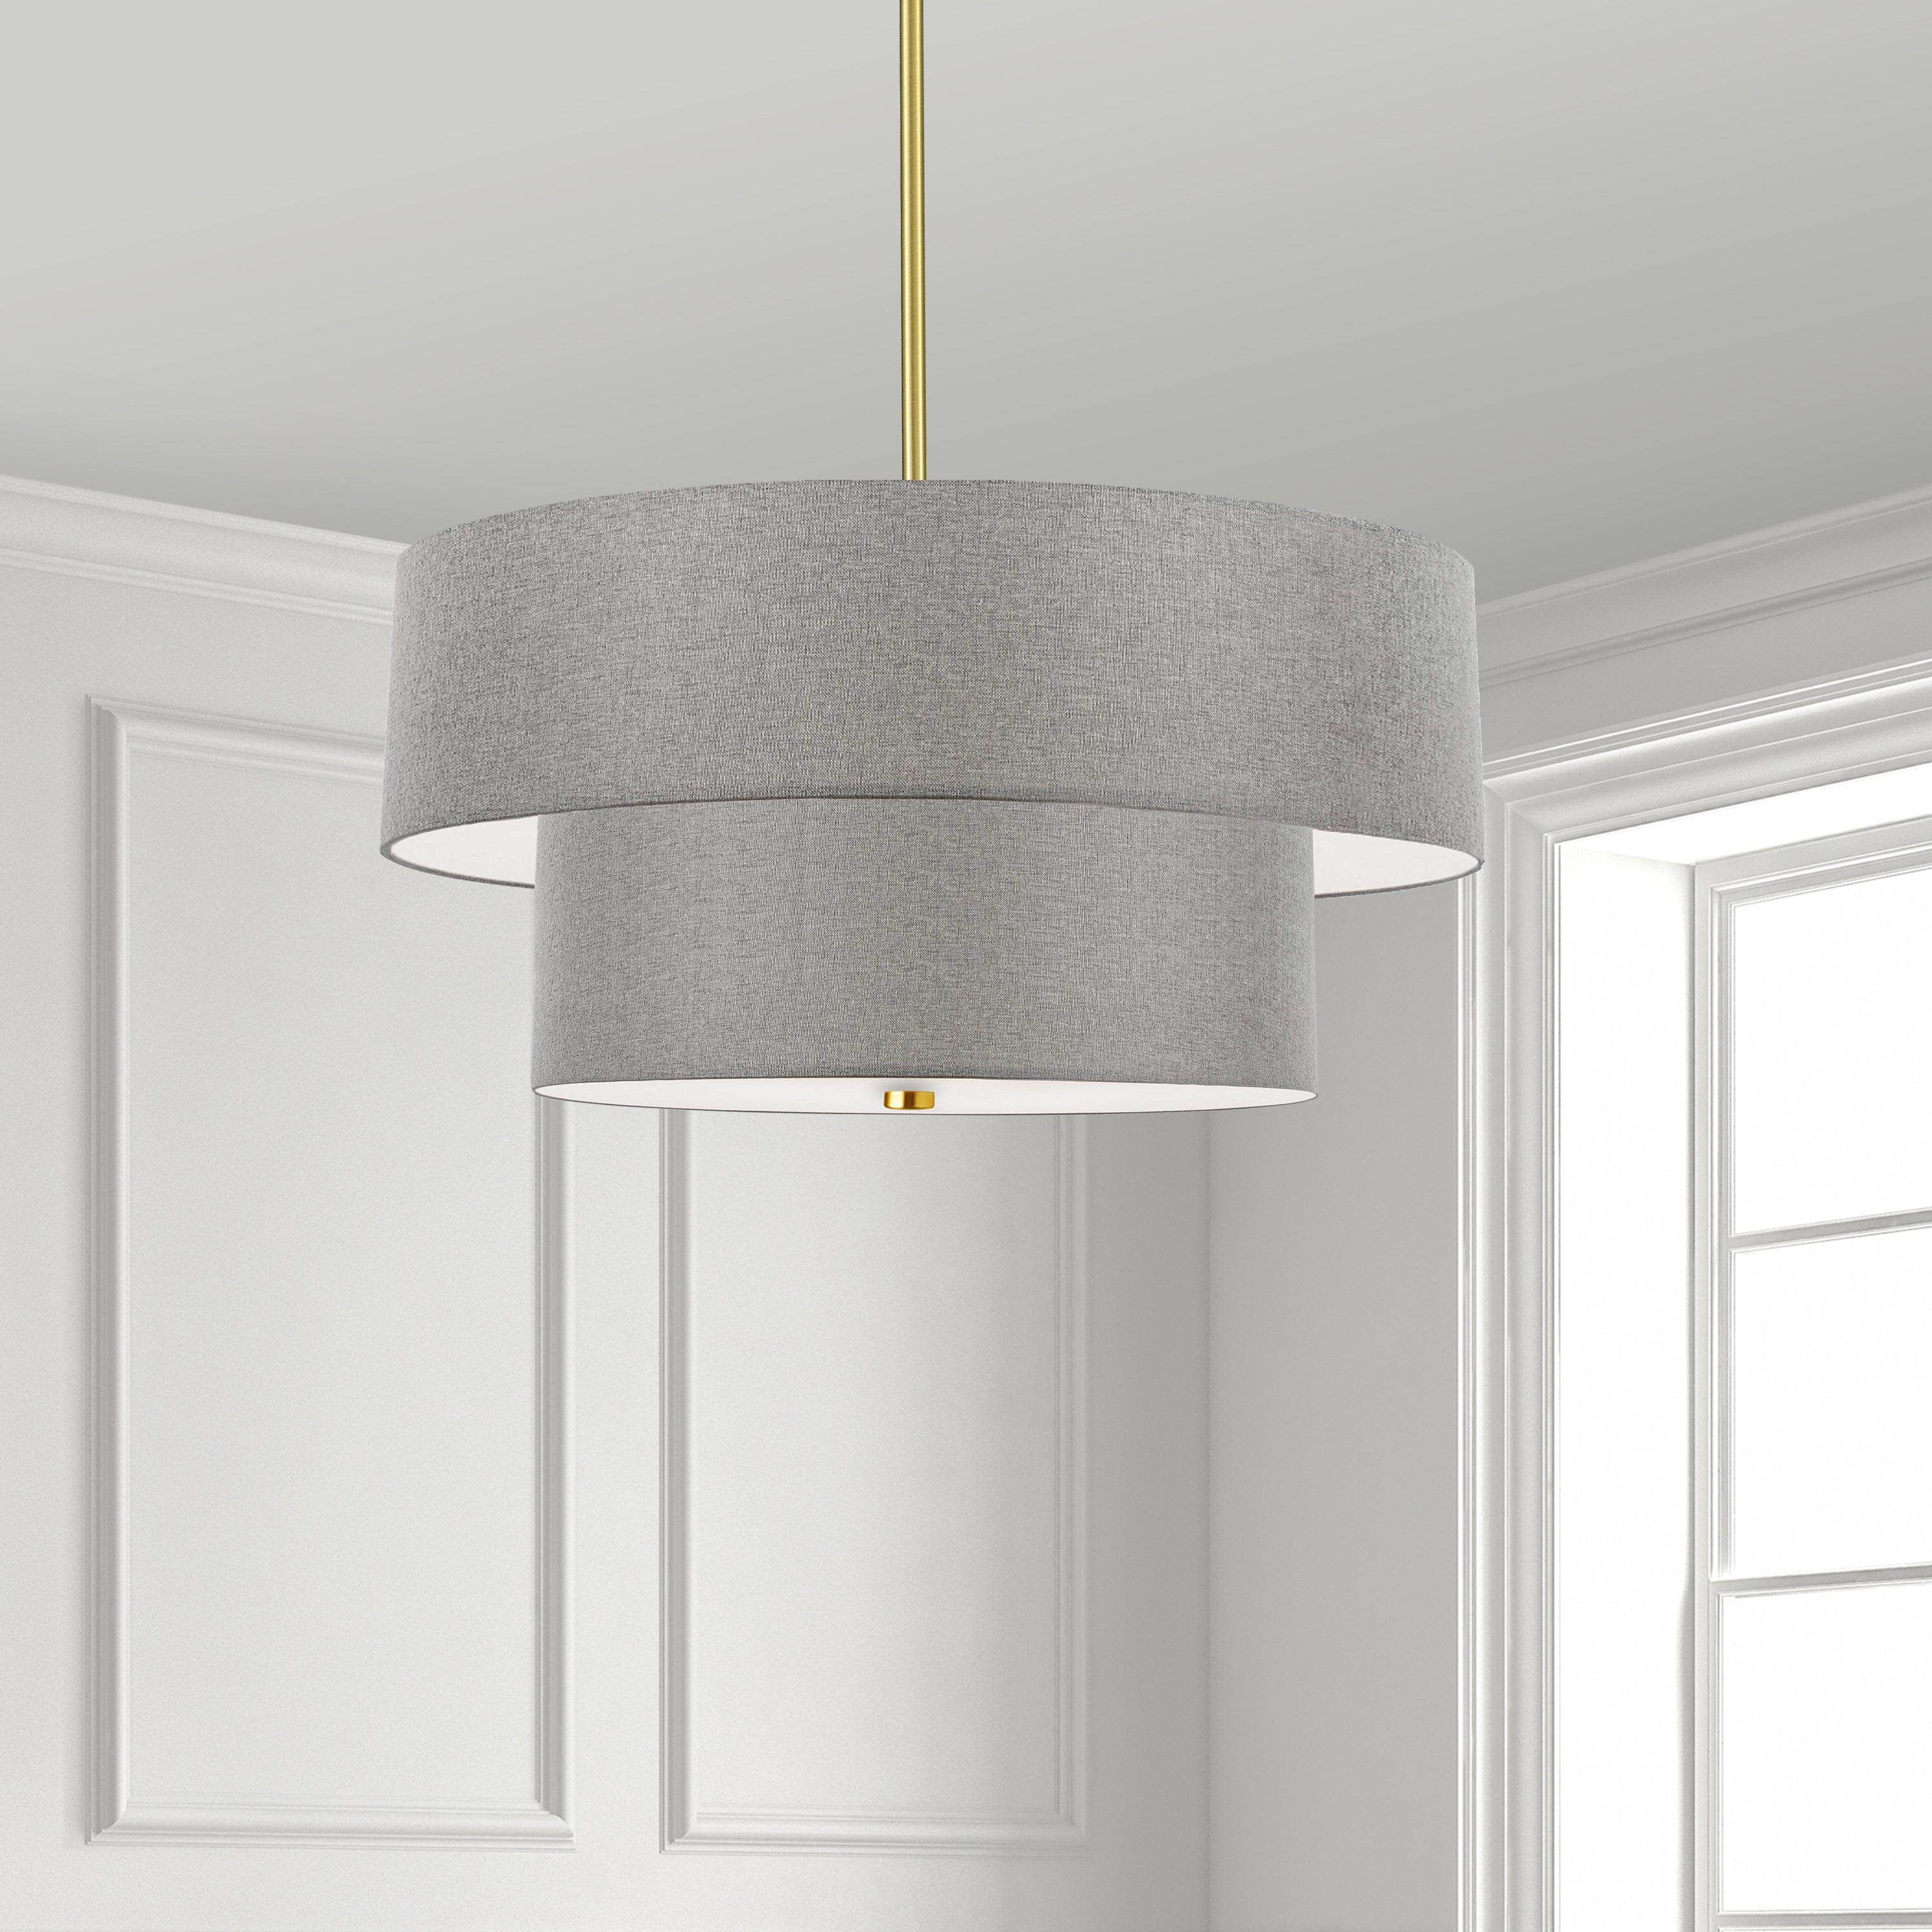 Dainolite Everly - 571-224P-AGB-GRY - 4 Light 2 Tier Pendant, Aged Brass with Grey Shade - Aged Brass